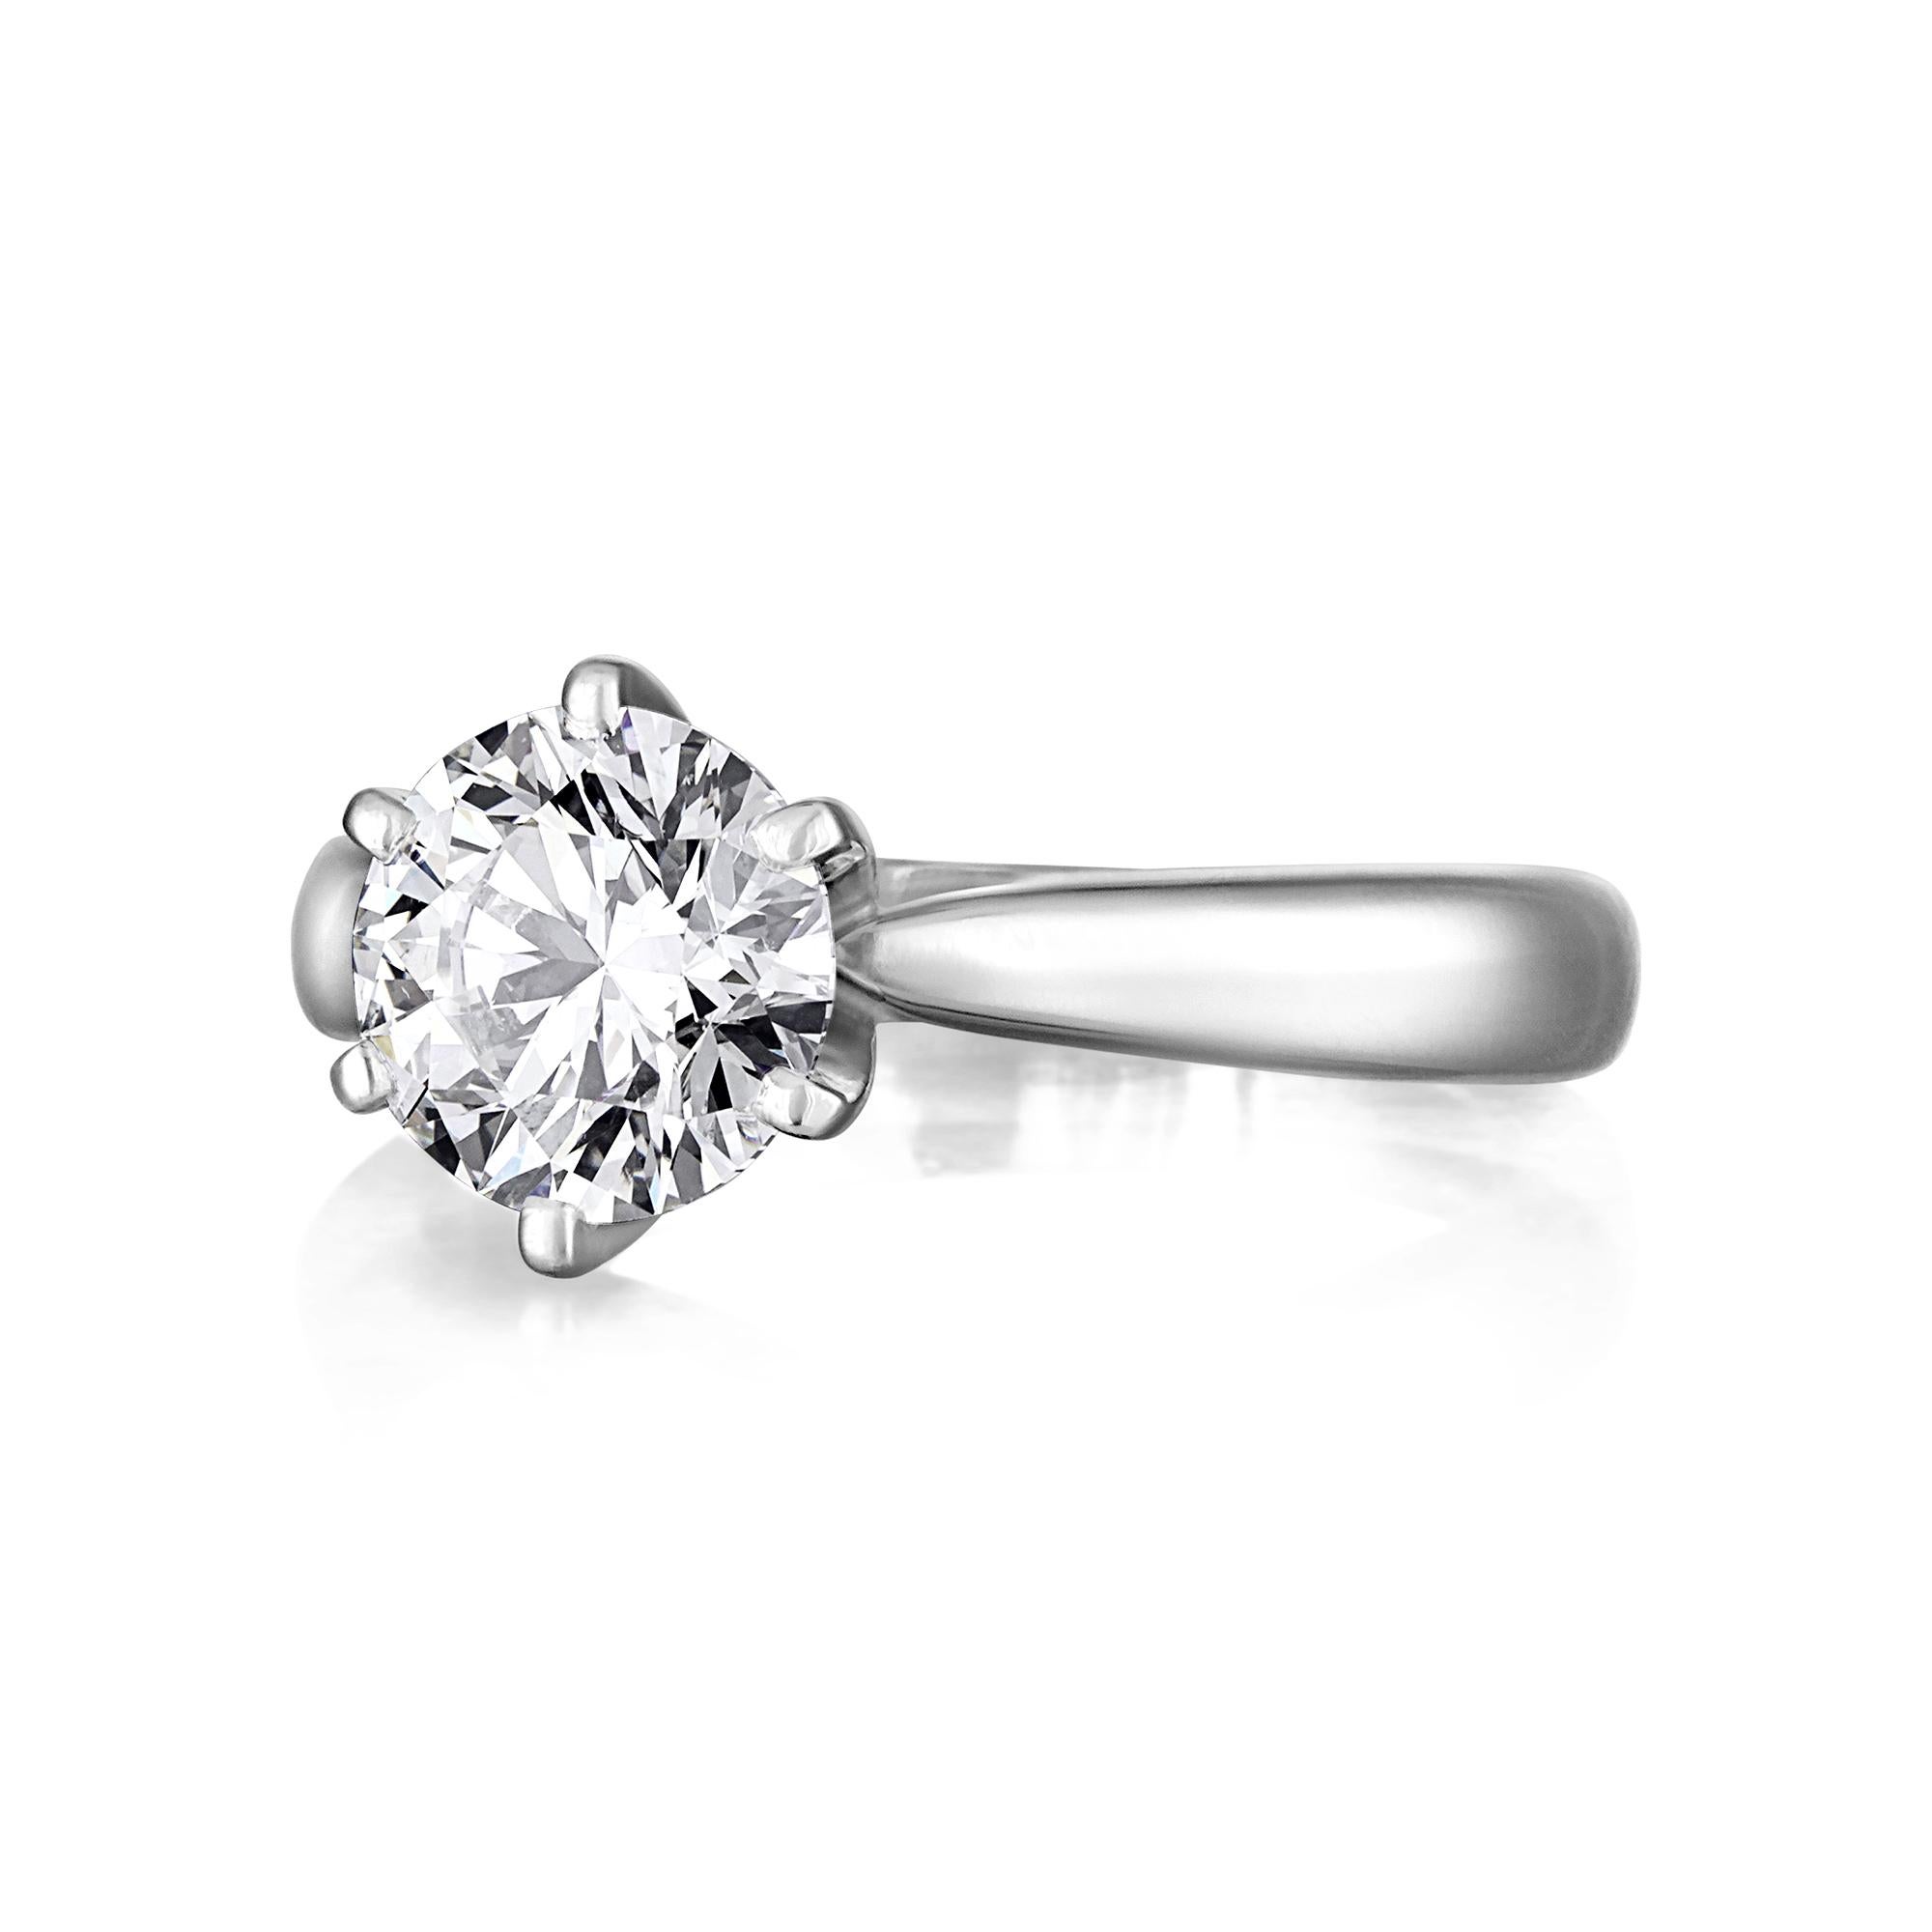 Elegant, Simple and Timeless.. A solitaire engagement ring is famed for its timeless simplicity. 
If you are looking for the perfect ring to tell her how much you love her, look no further. Buy her this exquisite  and the most classic, elegant